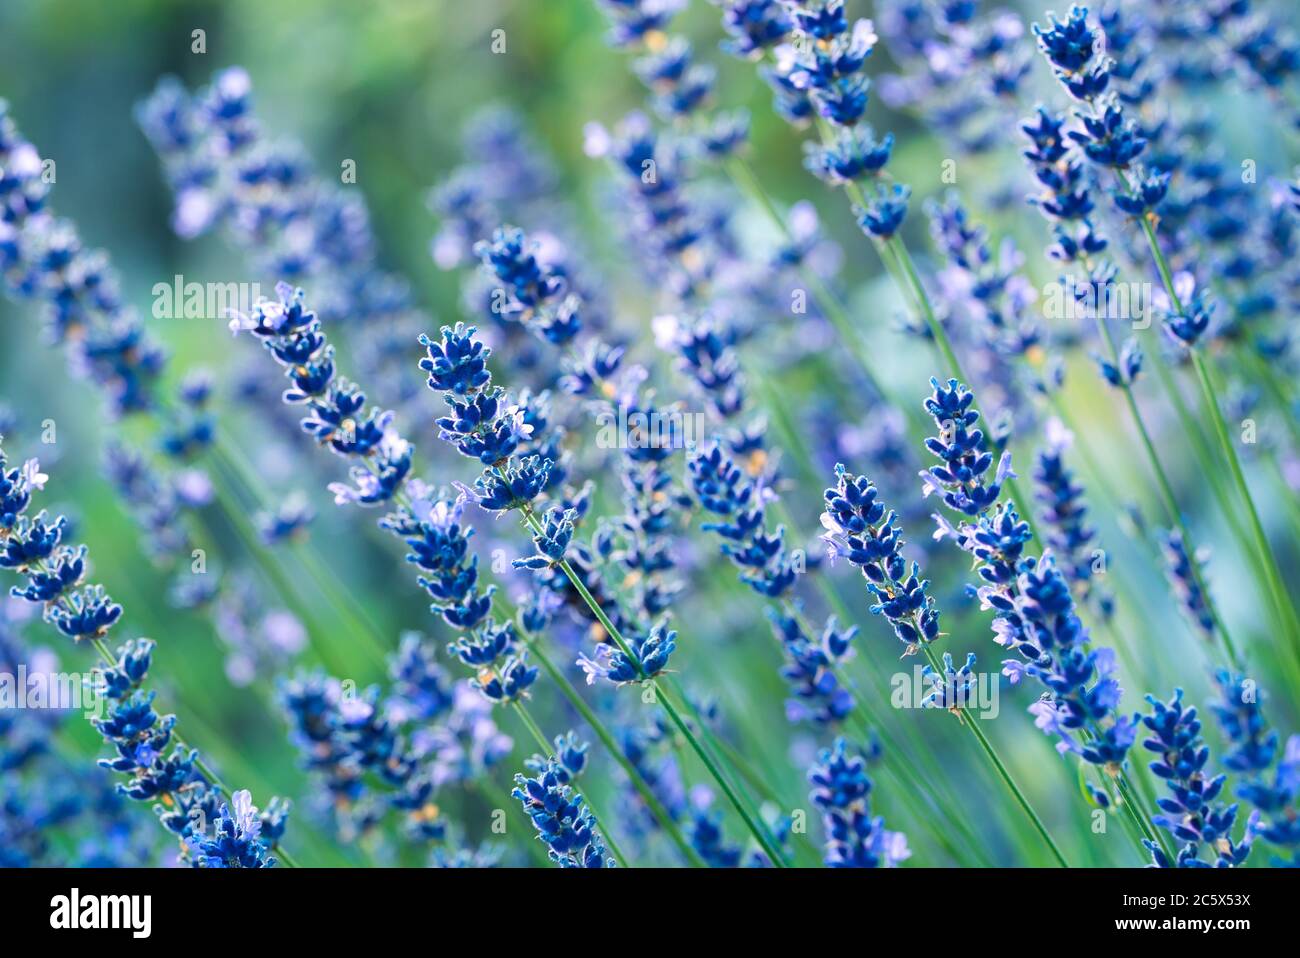 Beautiful lavender flowers in the garden. Stock photo. Stock Photo